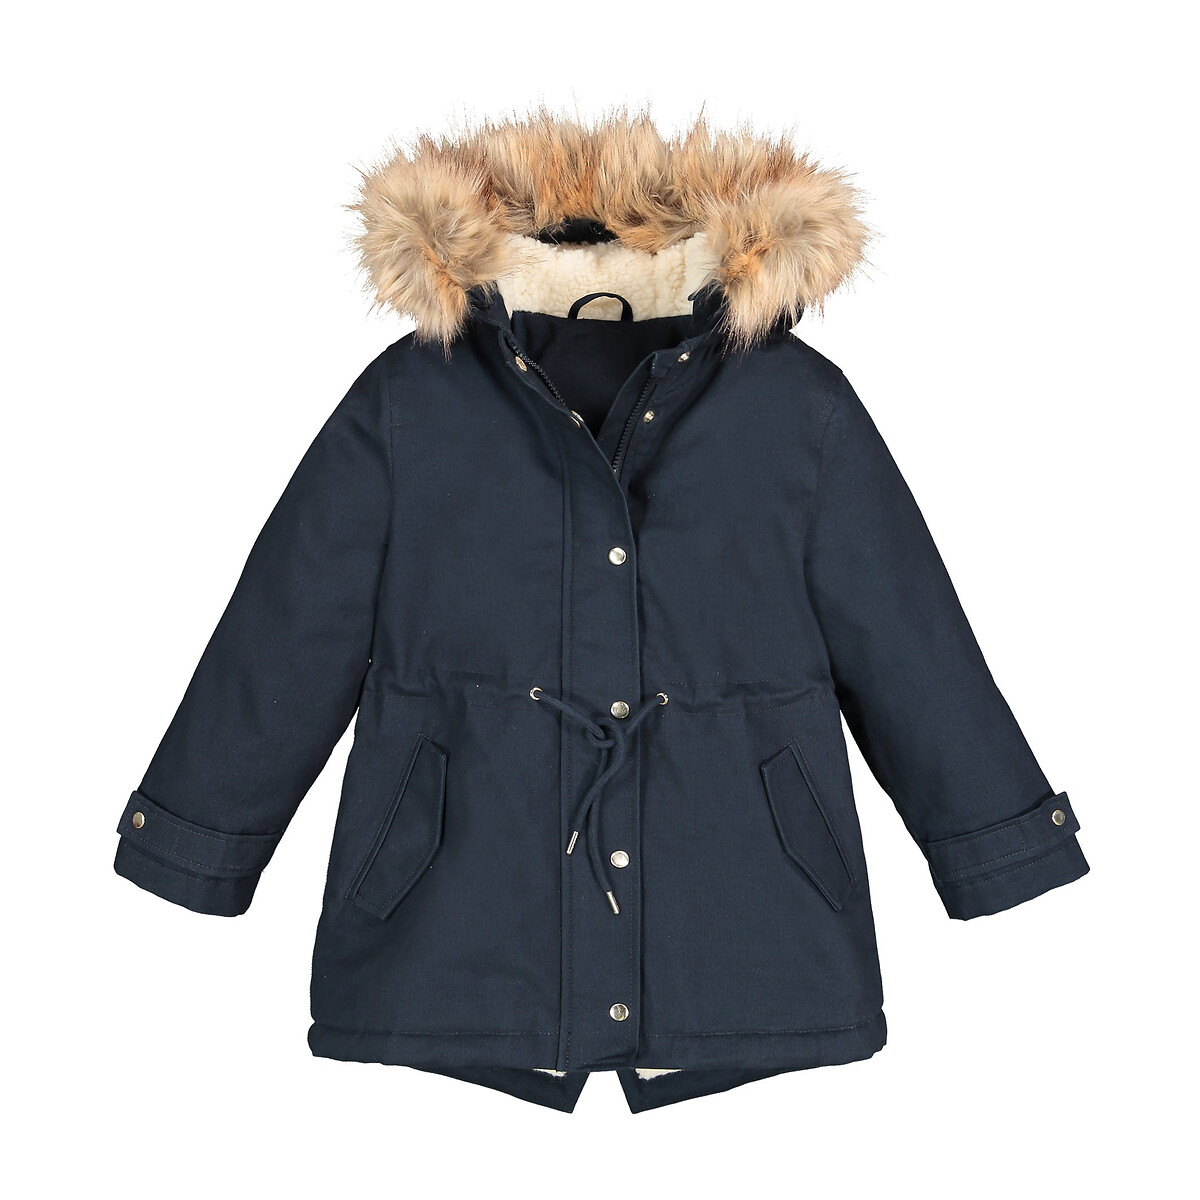 Cotton Warm Hooded Parka, 2-14 Years